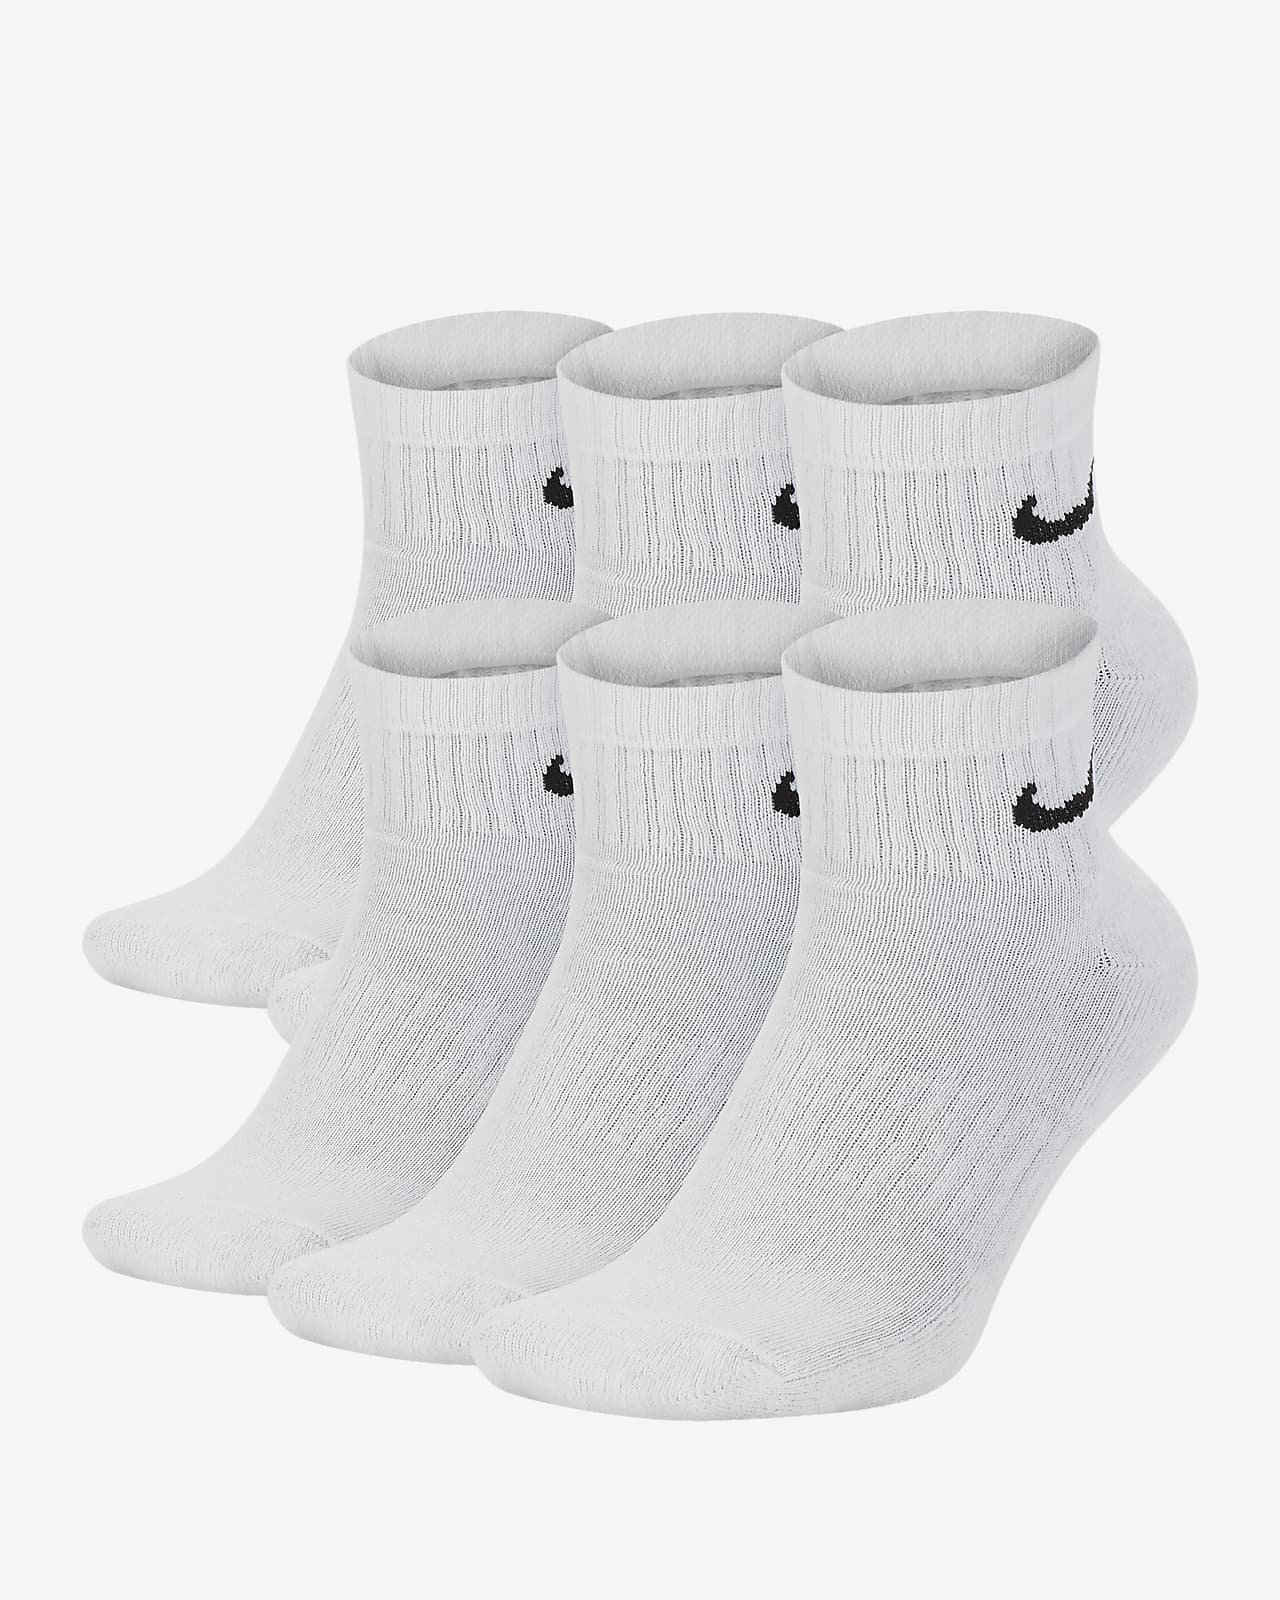 Chaussettes de training Nike Everyday Cushioned (6 paires)